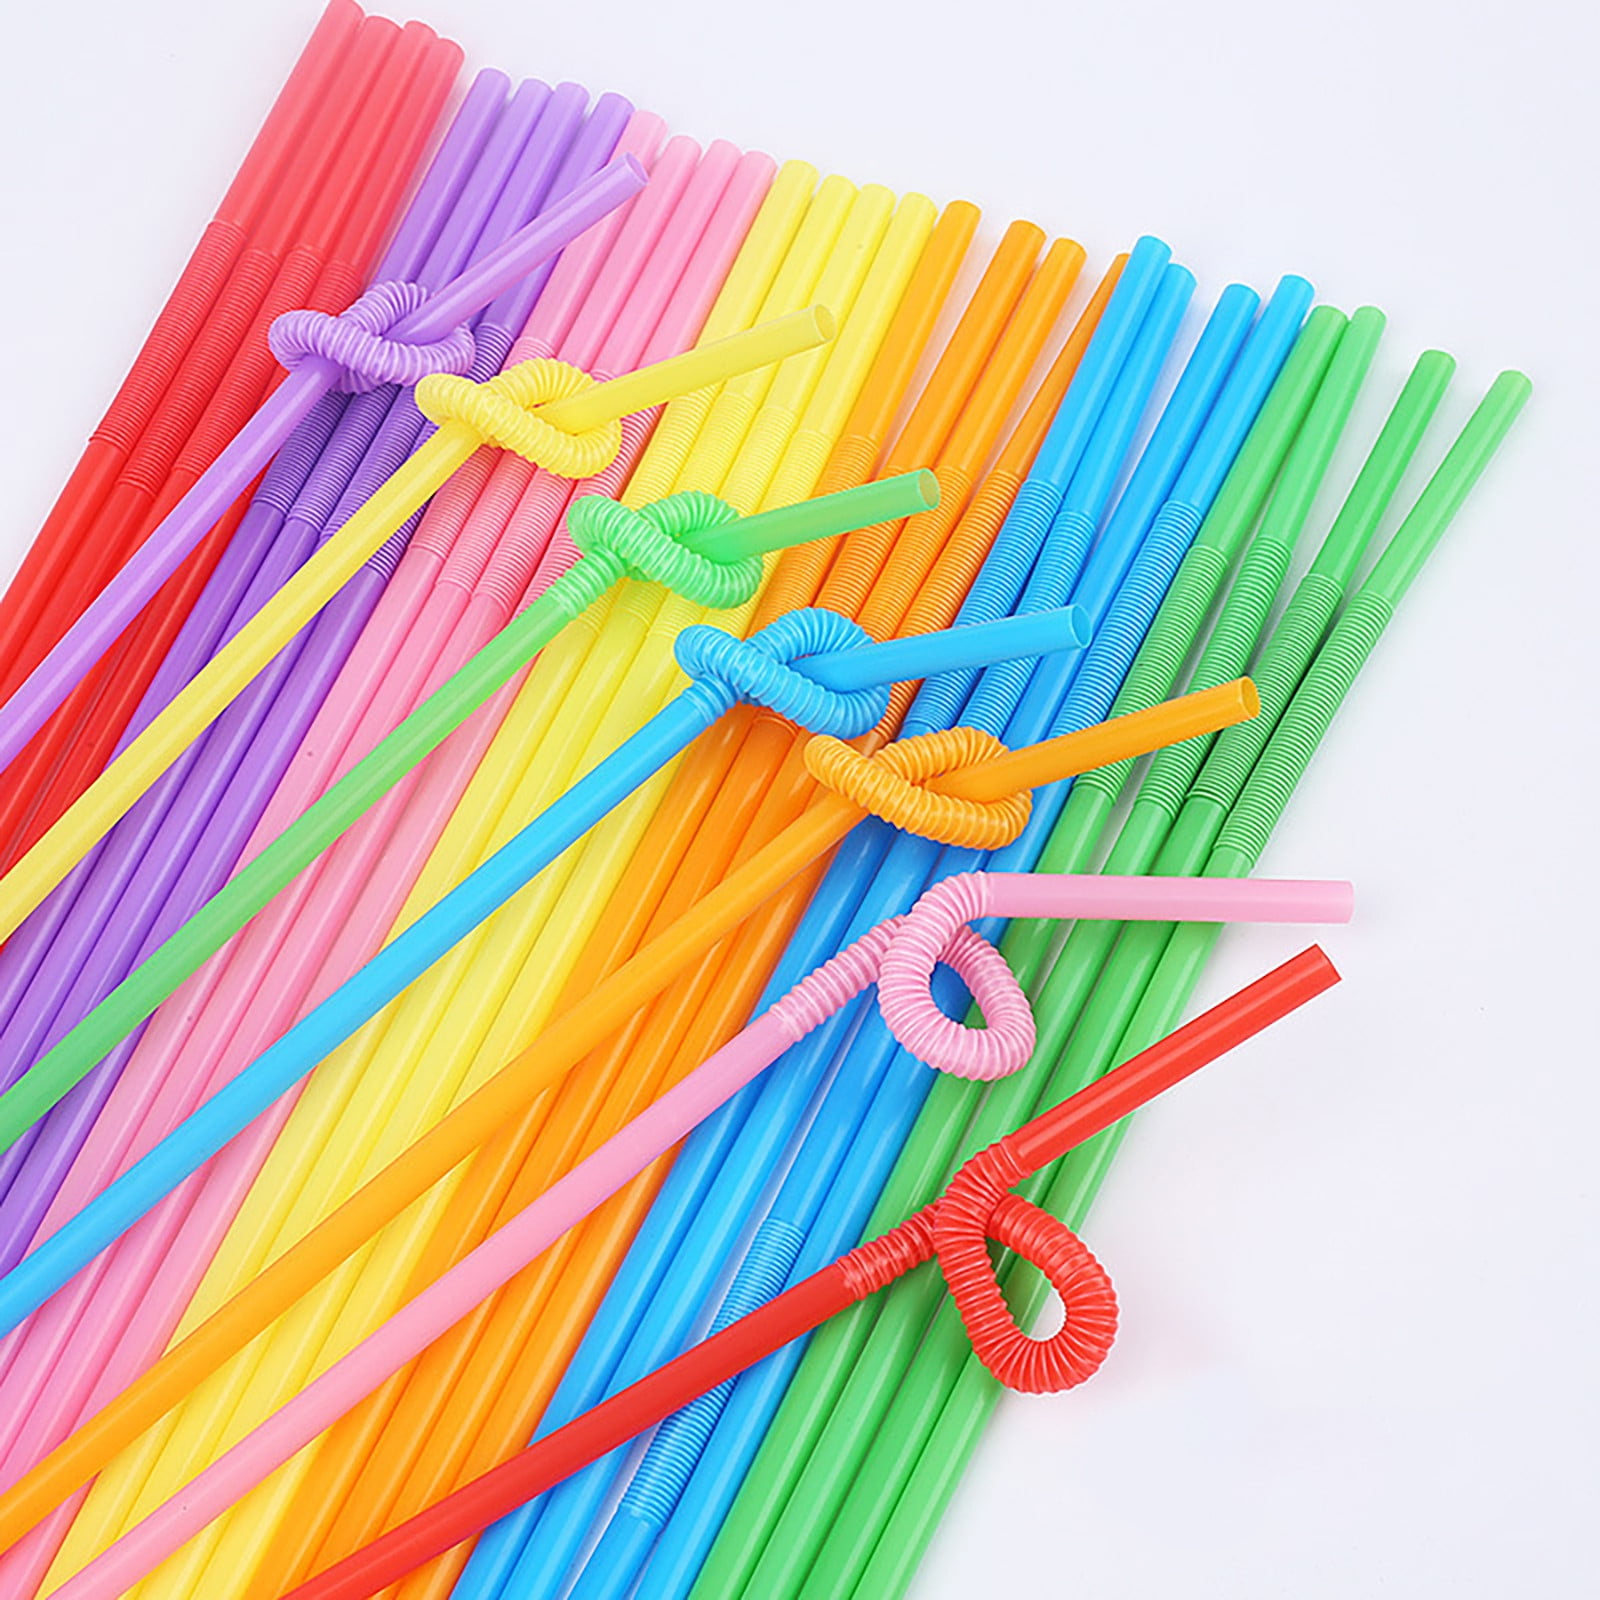 1000 Pcs Black Disposable Plastic Straws For Kitchen Dining Bar Accessories  Cocktail Rietjes Beverage Pajitas Party Cannucce